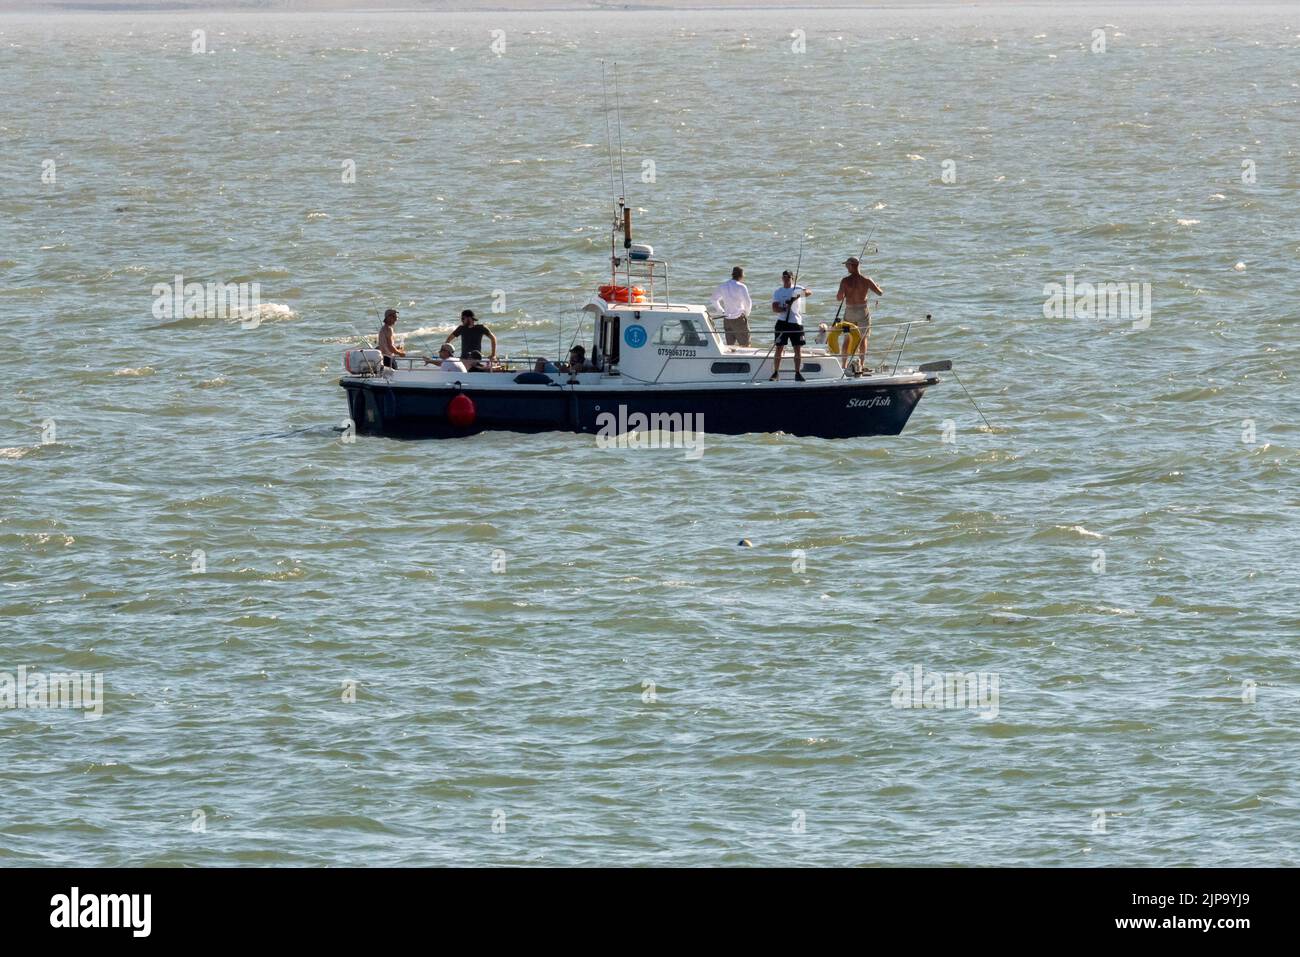 Sea fishing anglers on a small boat in the Thames Estuary, off Southend on Sea, Essex, UK. Saltwater angling in the River Thames Stock Photo